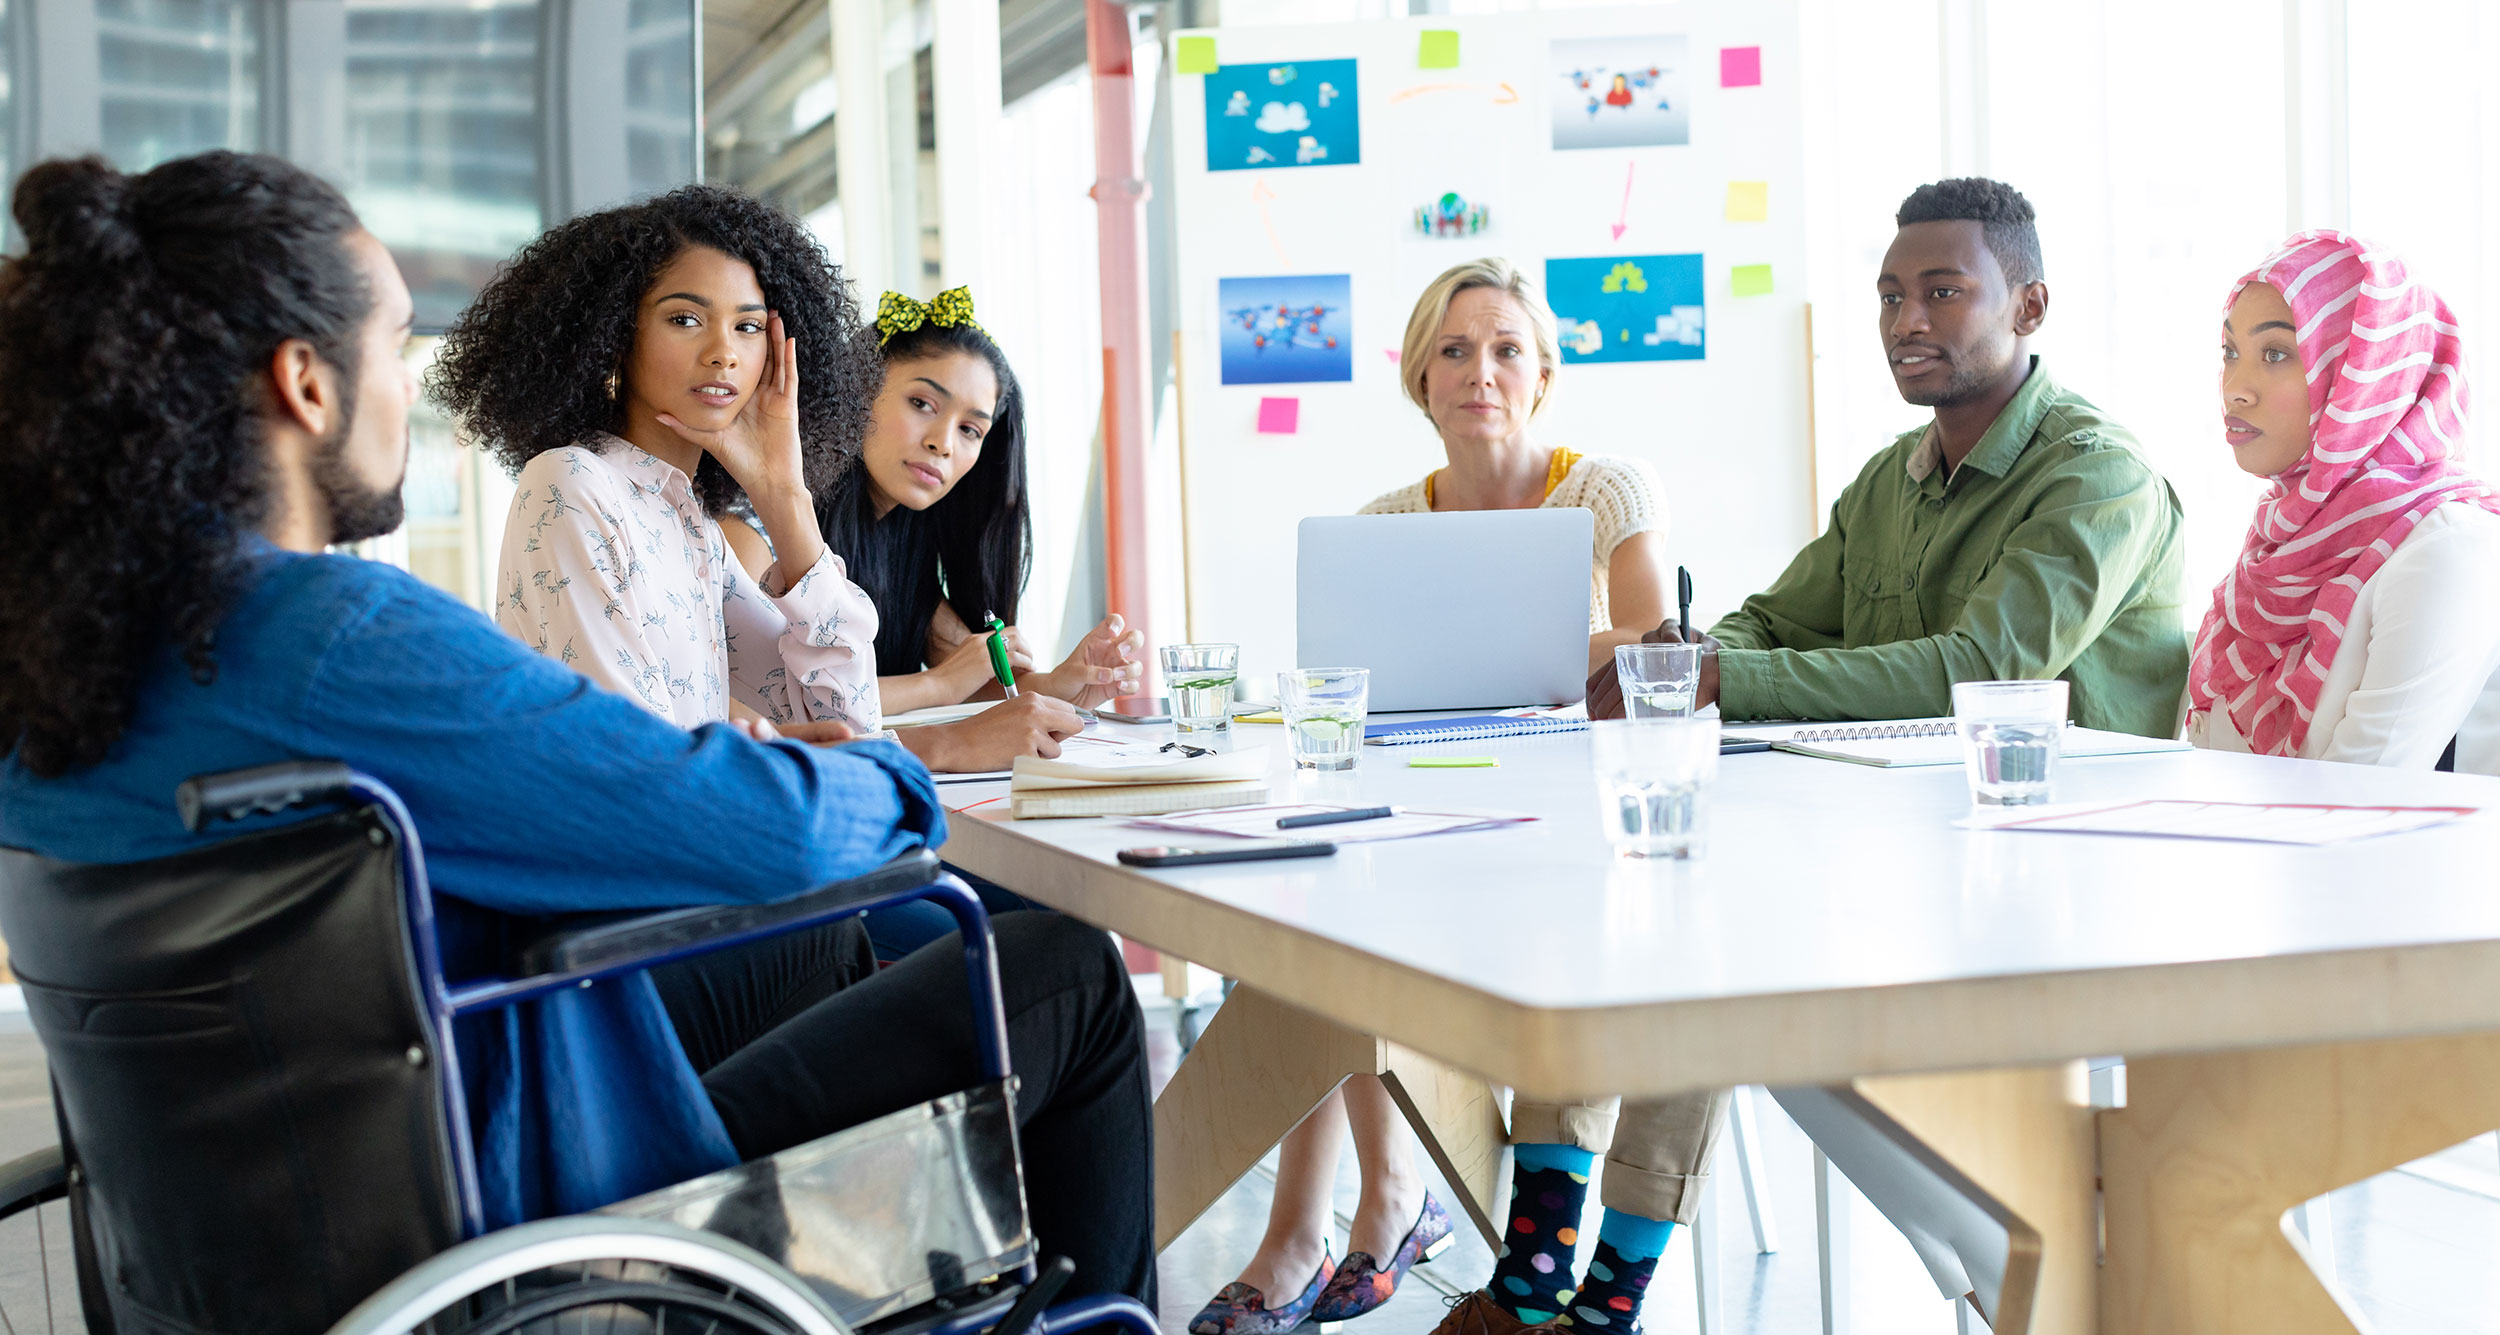 Group of ethnic diverse workers in office space smiling around desk, one in wheelchair